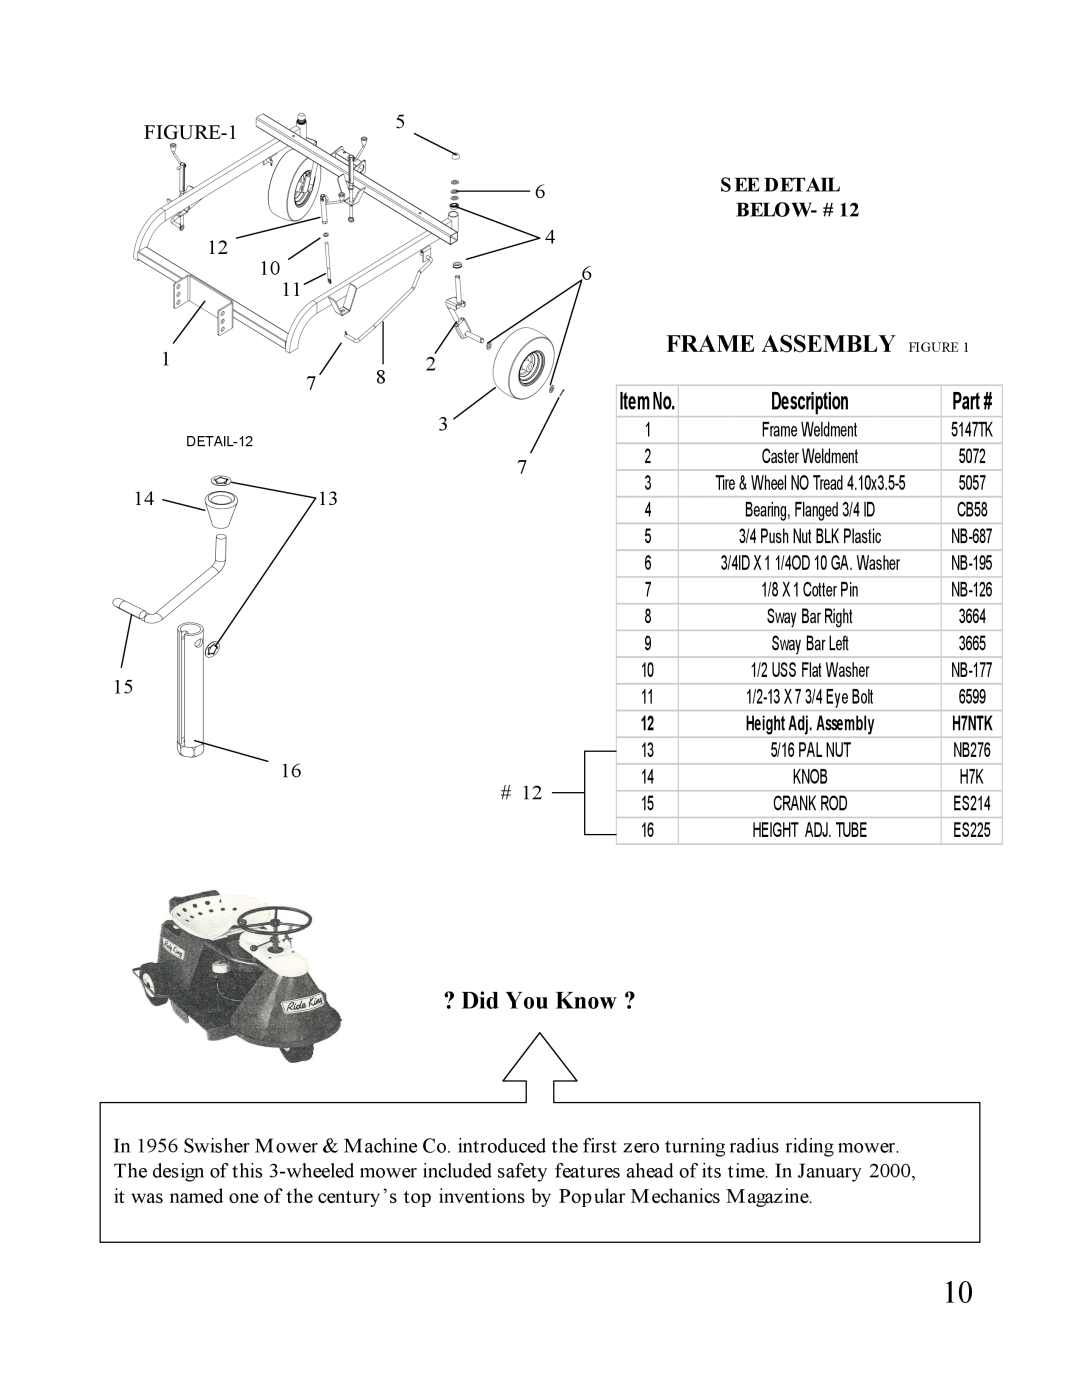 Swisher ONFT1150 manual Frame Assembly Figure, ? Did You Know ?, See Detail Below- #, Description 